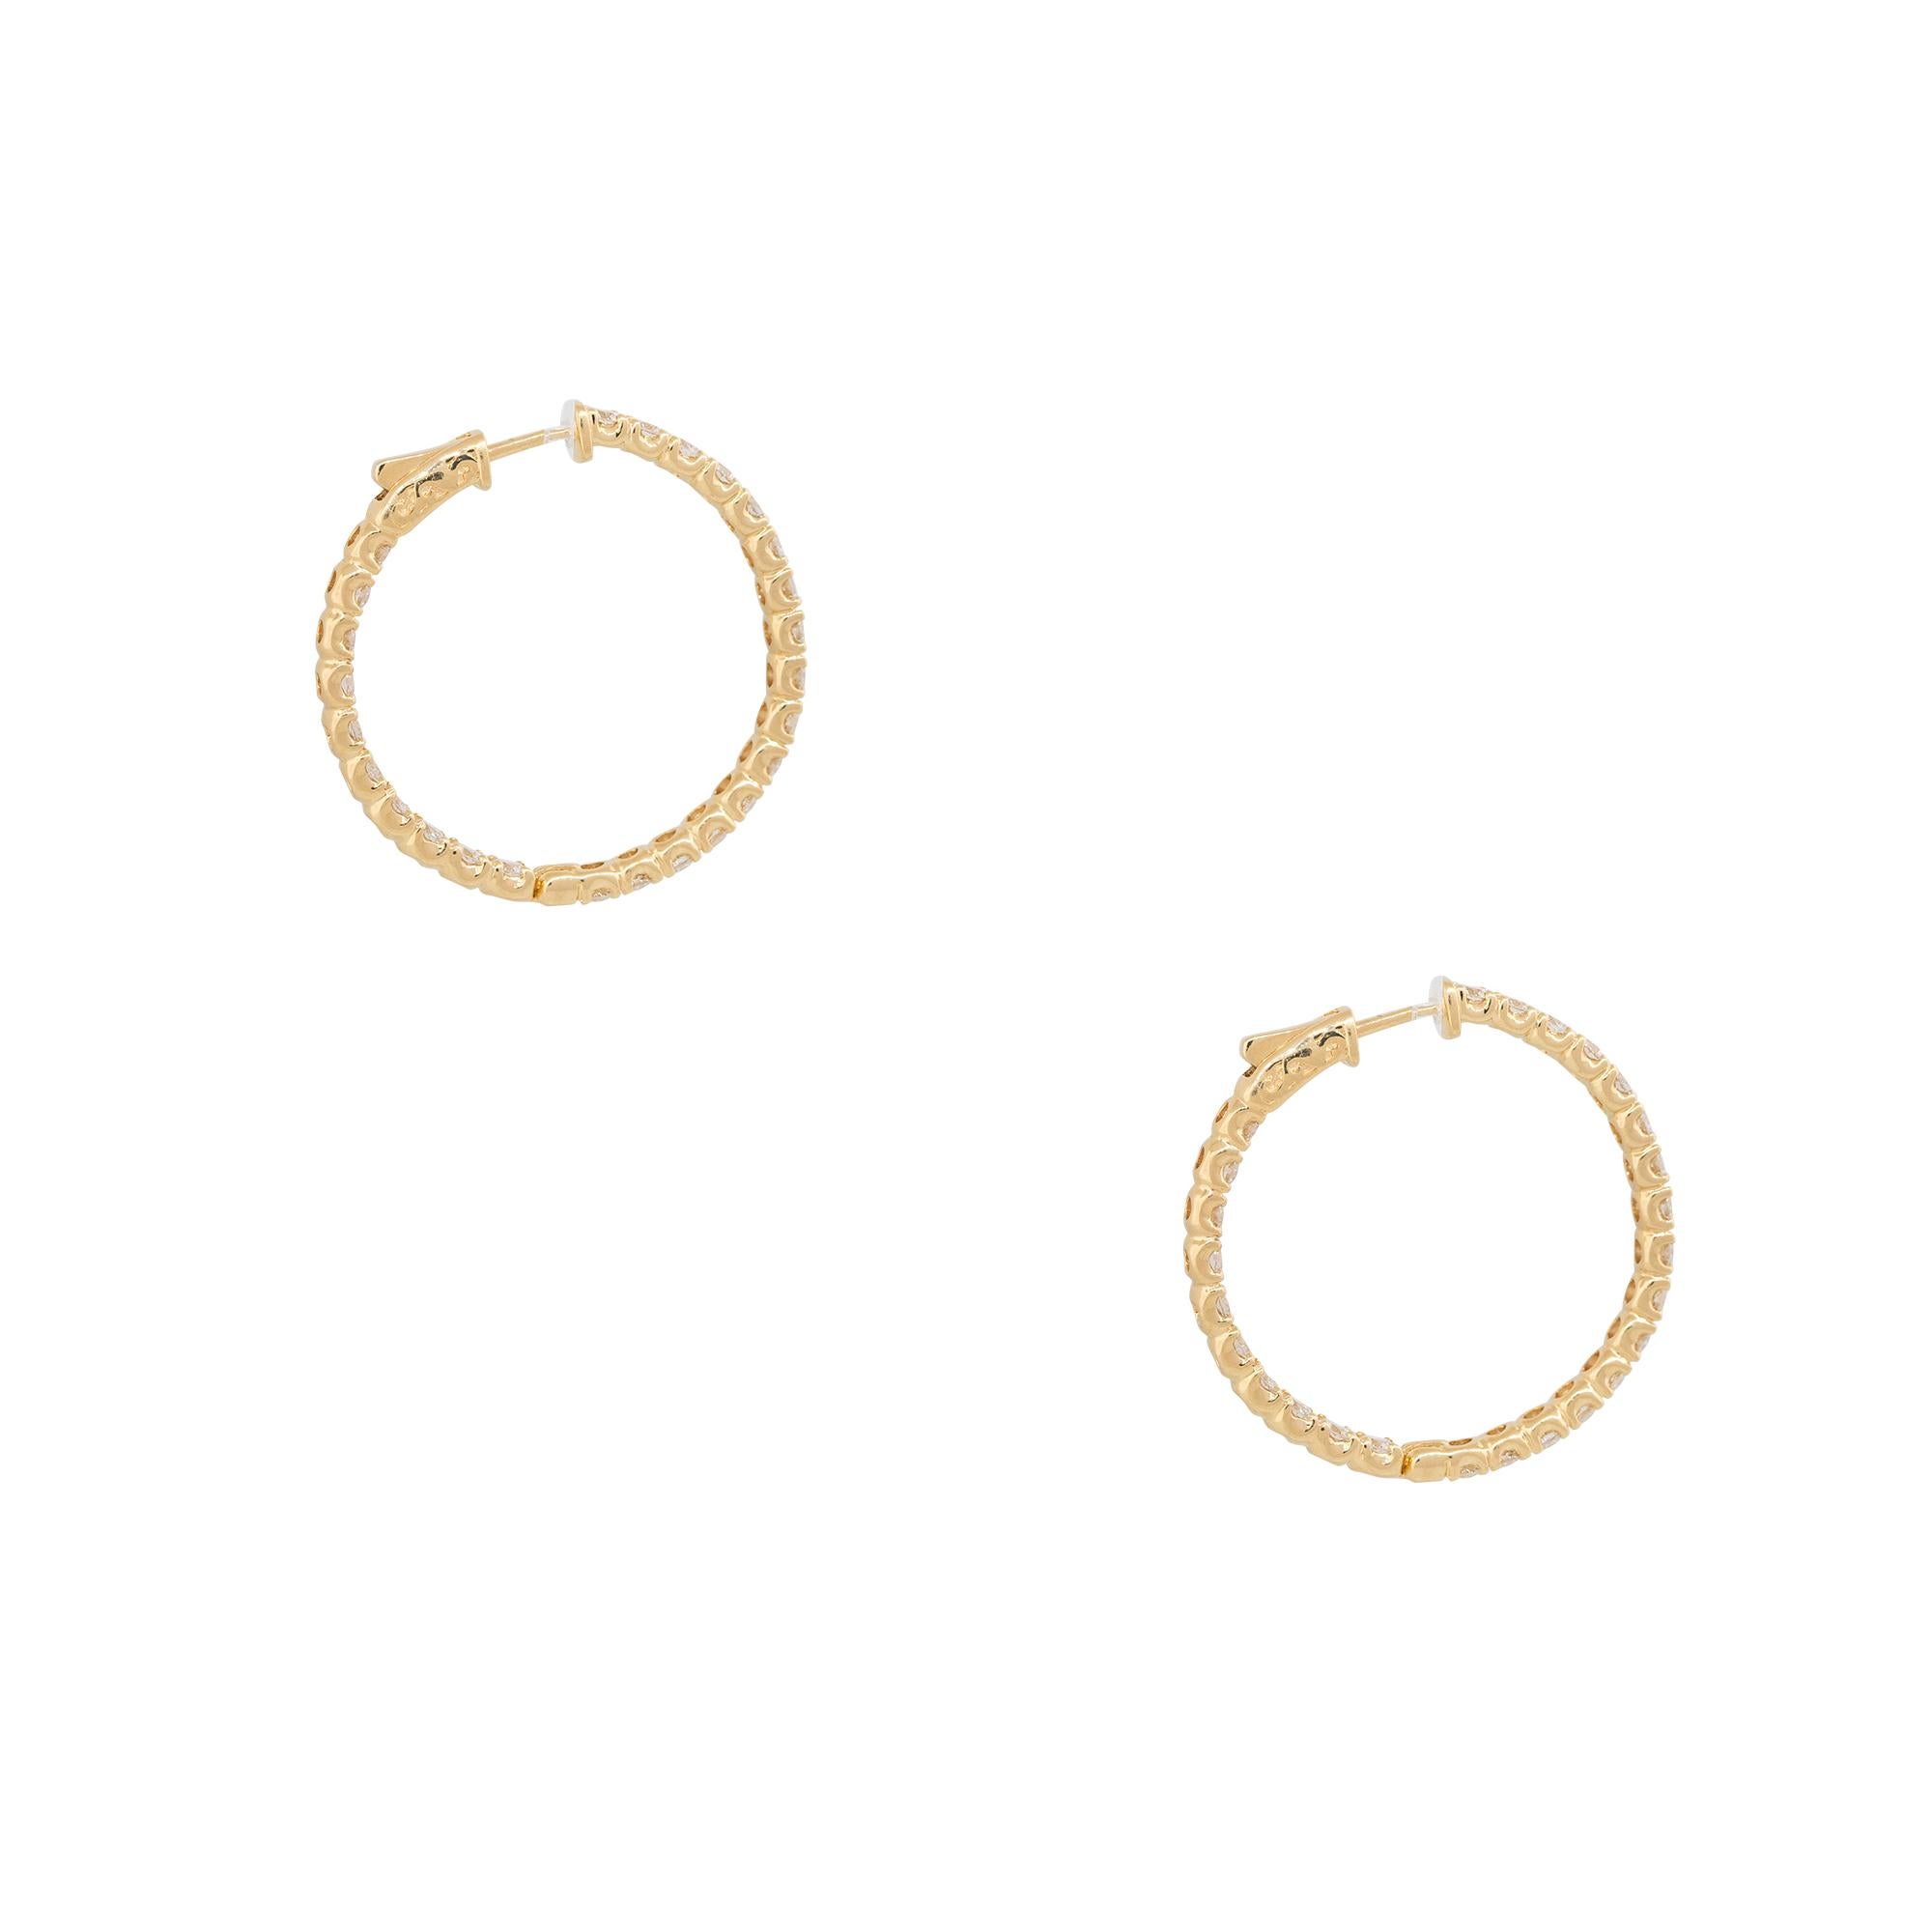 4.24 Carat Round Brilliant Diamond Inside-Out Hoop Earrings 18 Karat In Stock In Excellent Condition For Sale In Boca Raton, FL